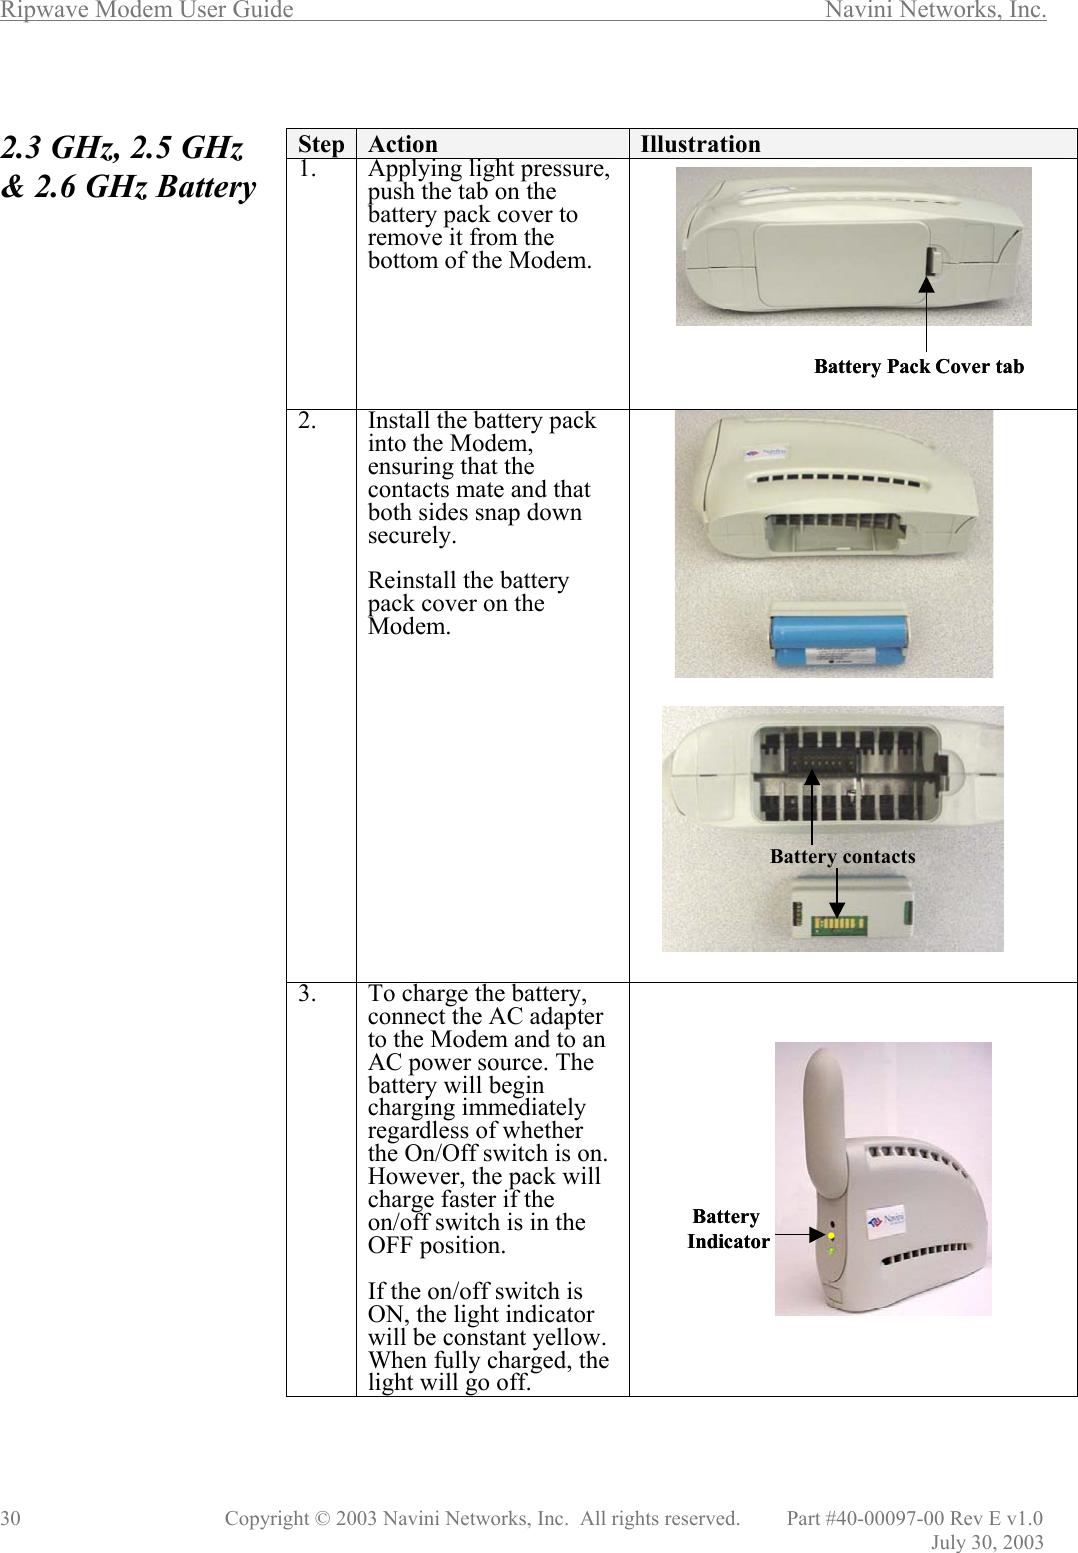 Ripwave Modem User Guide        Navini Networks, Inc. 30      Copyright © 2003 Navini Networks, Inc.  All rights reserved.         Part #40-00097-00 Rev E v1.0                   July 30, 2003  2.3 GHz, 2.5 GHz &amp; 2.6 GHz Battery                                             Step  Action  Illustration 1.  Applying light pressure, push the tab on the battery pack cover to remove it from the bottom of the Modem.  2.  Install the battery pack into the Modem, ensuring that the contacts mate and that both sides snap down securely.  Reinstall the battery pack cover on the Modem.   3.  To charge the battery, connect the AC adapter to the Modem and to an AC power source. The battery will begin charging immediately regardless of whether the On/Off switch is on. However, the pack will charge faster if the on/off switch is in the OFF position.  If the on/off switch is ON, the light indicator will be constant yellow. When fully charged, the light will go off.   BatteryIndicator .BatteryIndicator .Battery Pack Cover tabBattery Pack Cover tabBattery contactsBattery contacts